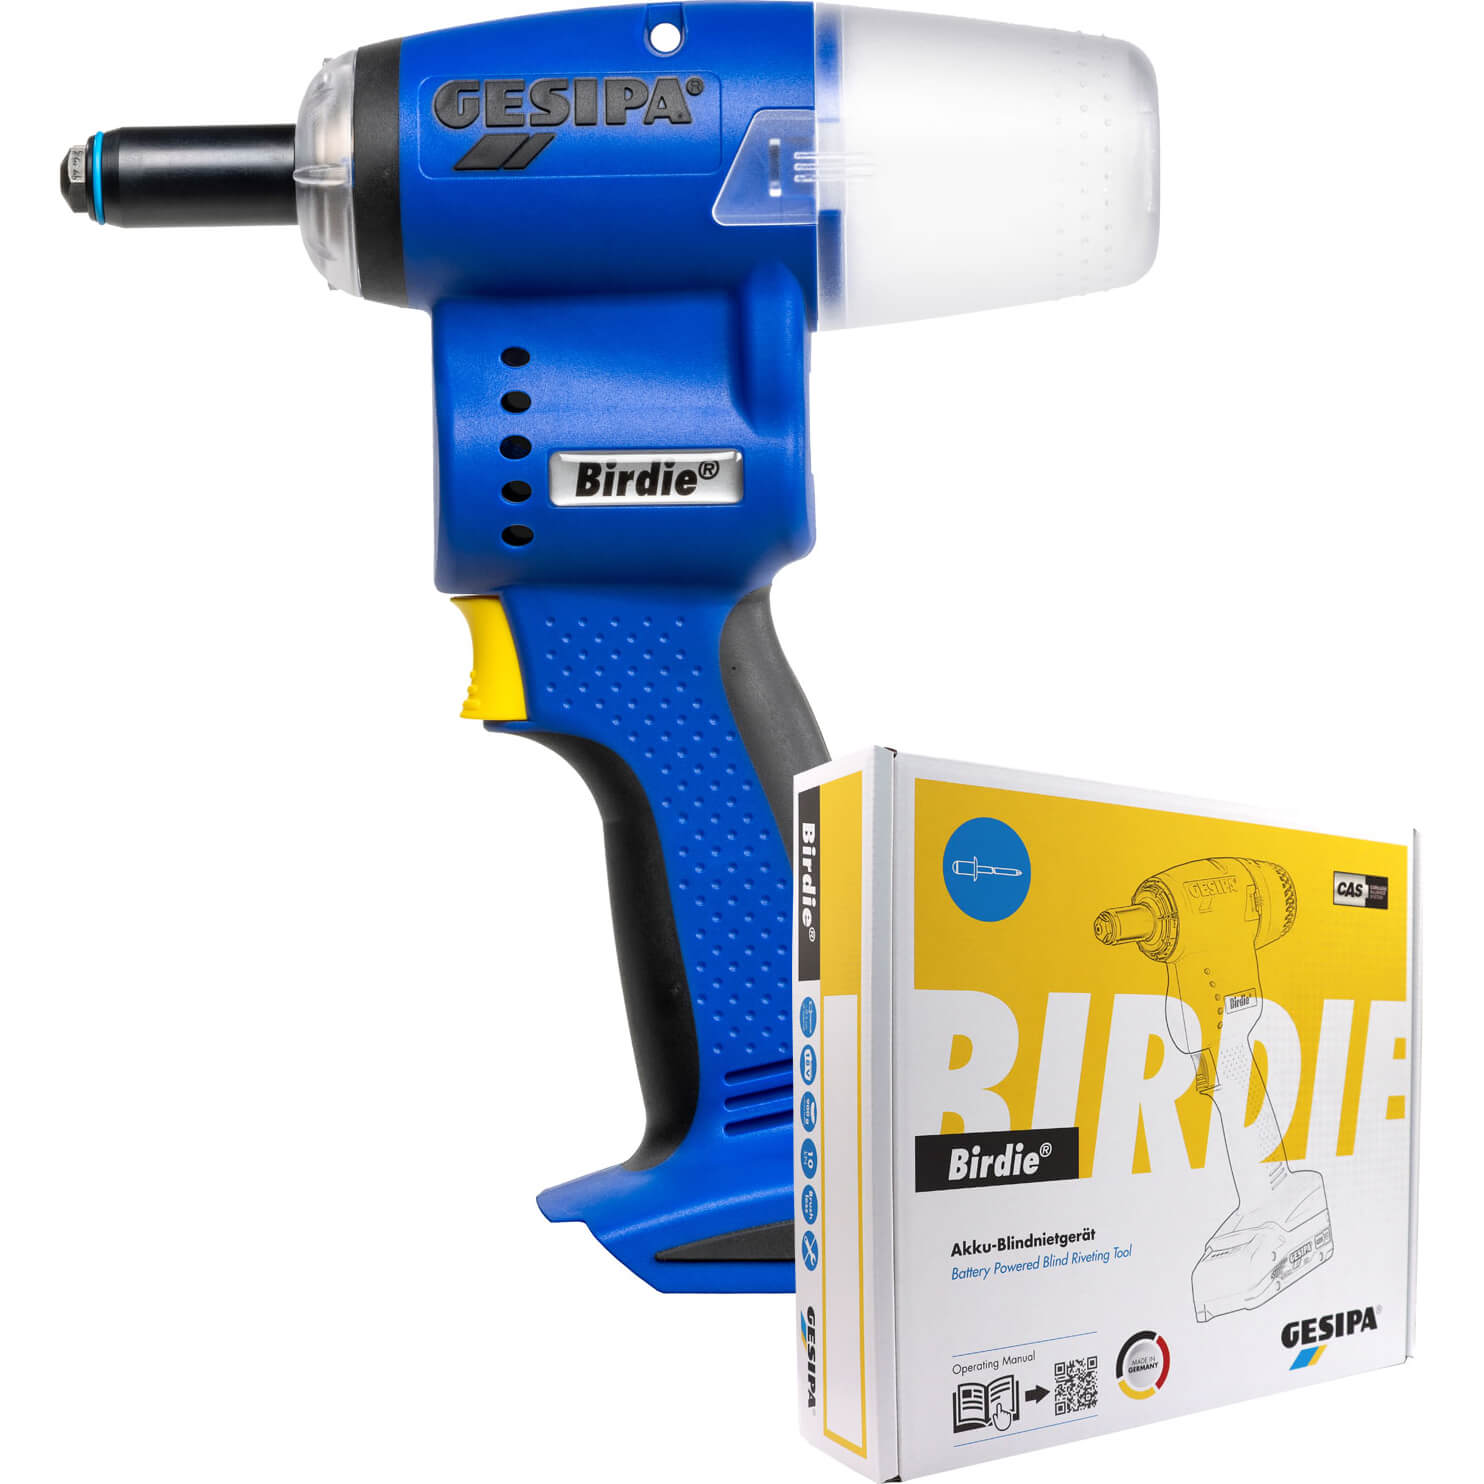 Gesipa Birdie 18v Cordless Brushless Riveter Tool No Batteries No Charger No Case